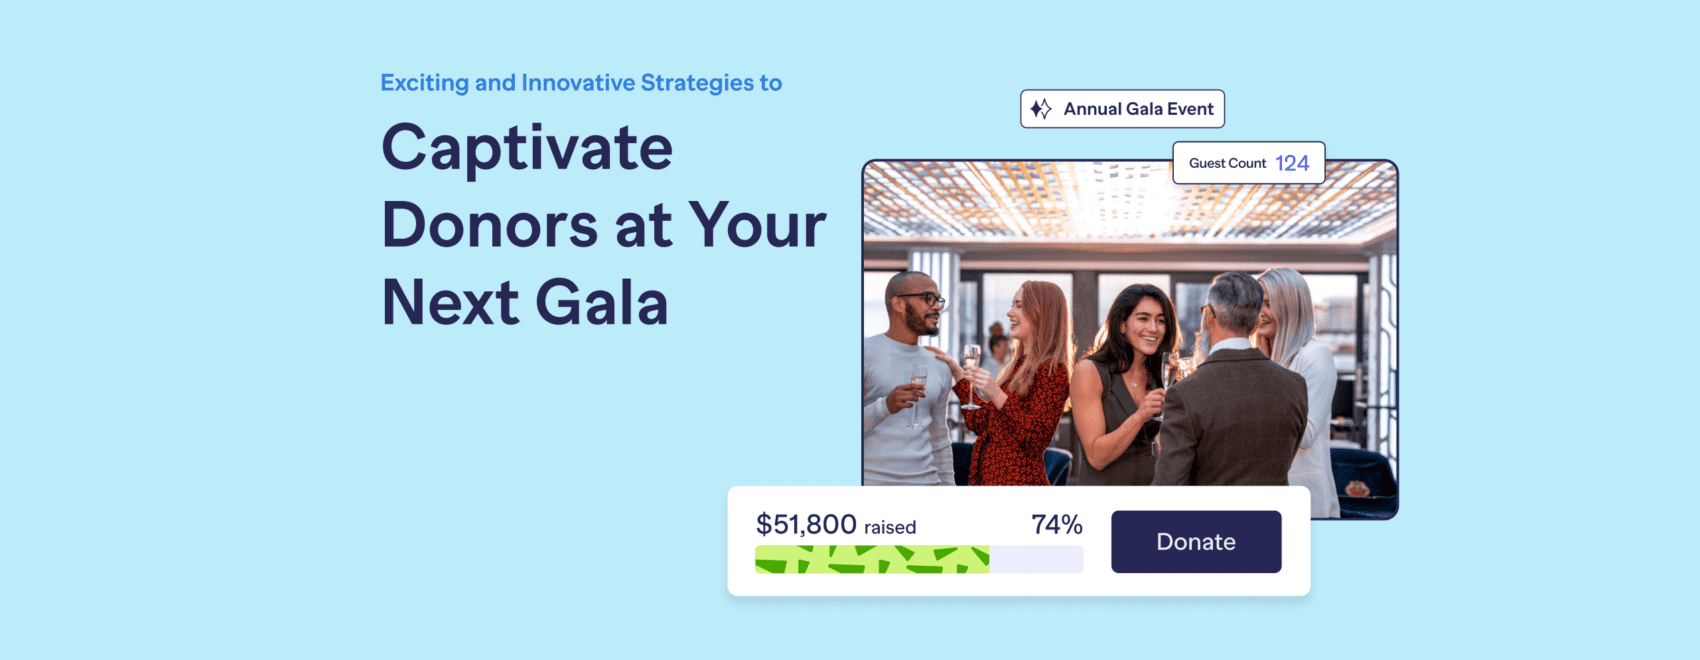 Exciting and Innovative Strategies to Captivate Donors at Your Next Gala